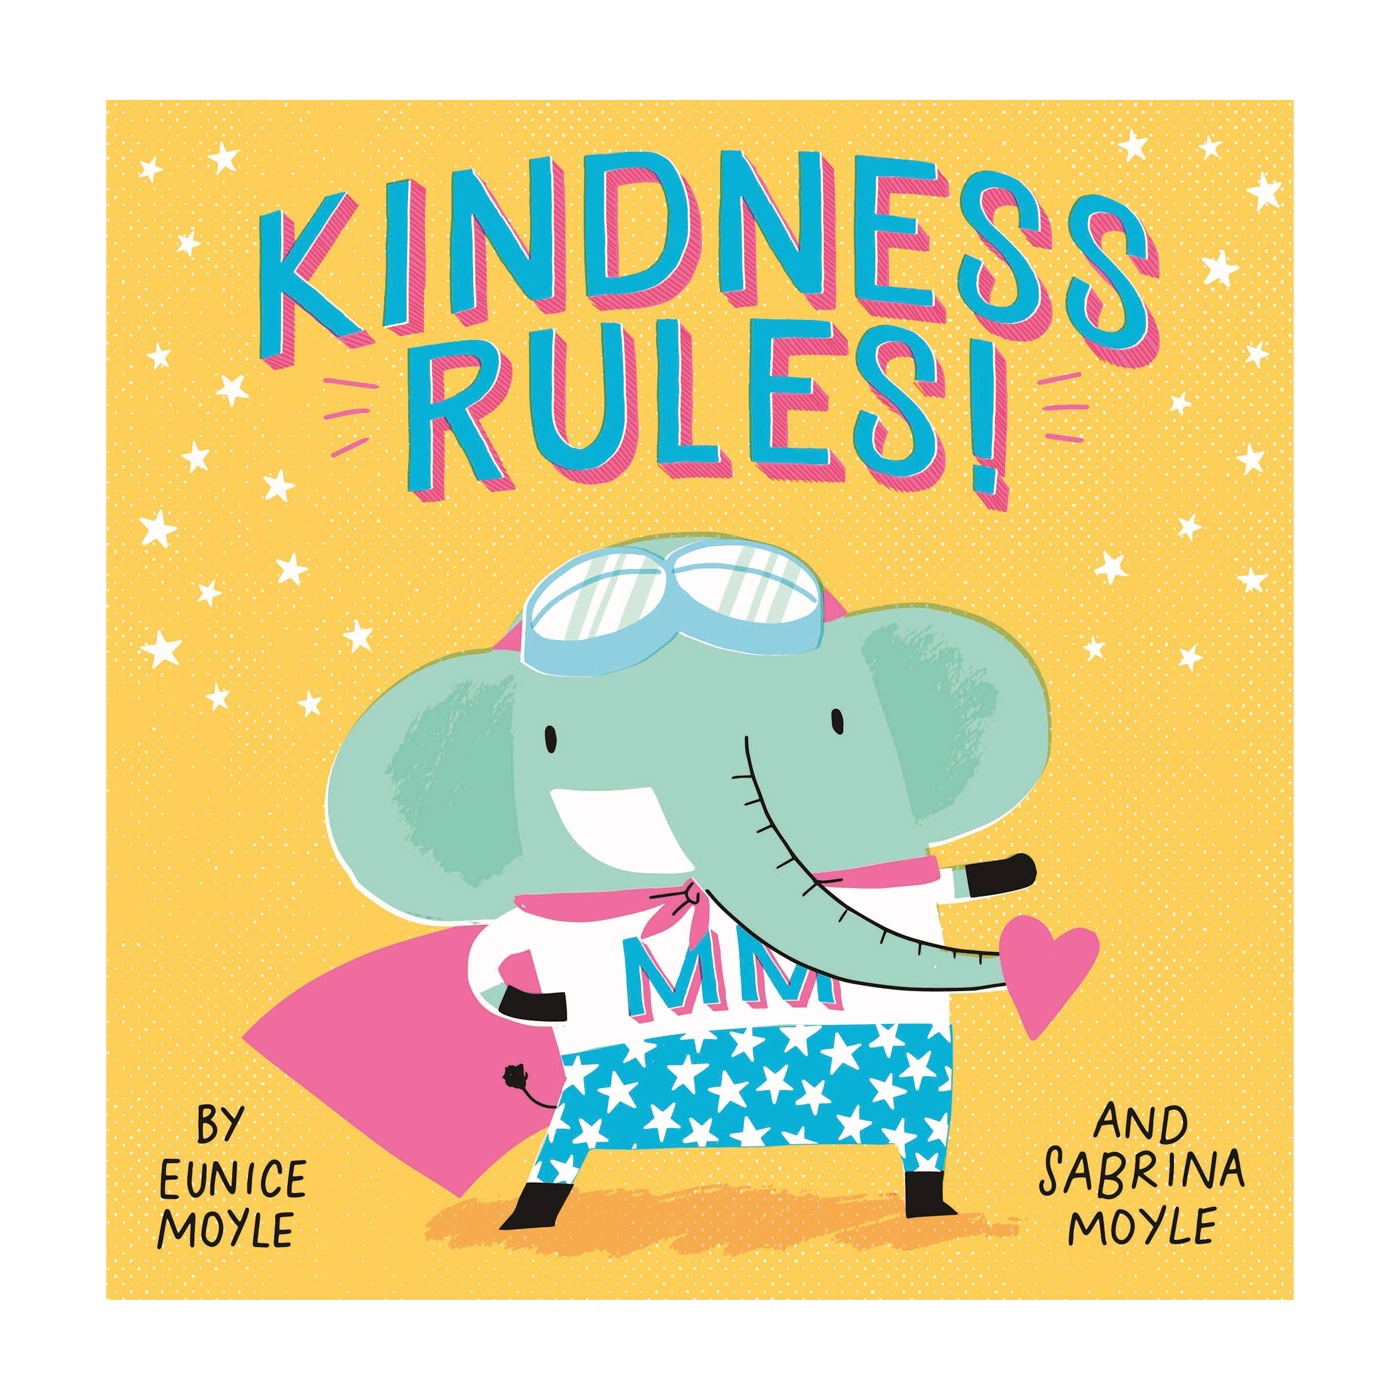  Kindness Rules!